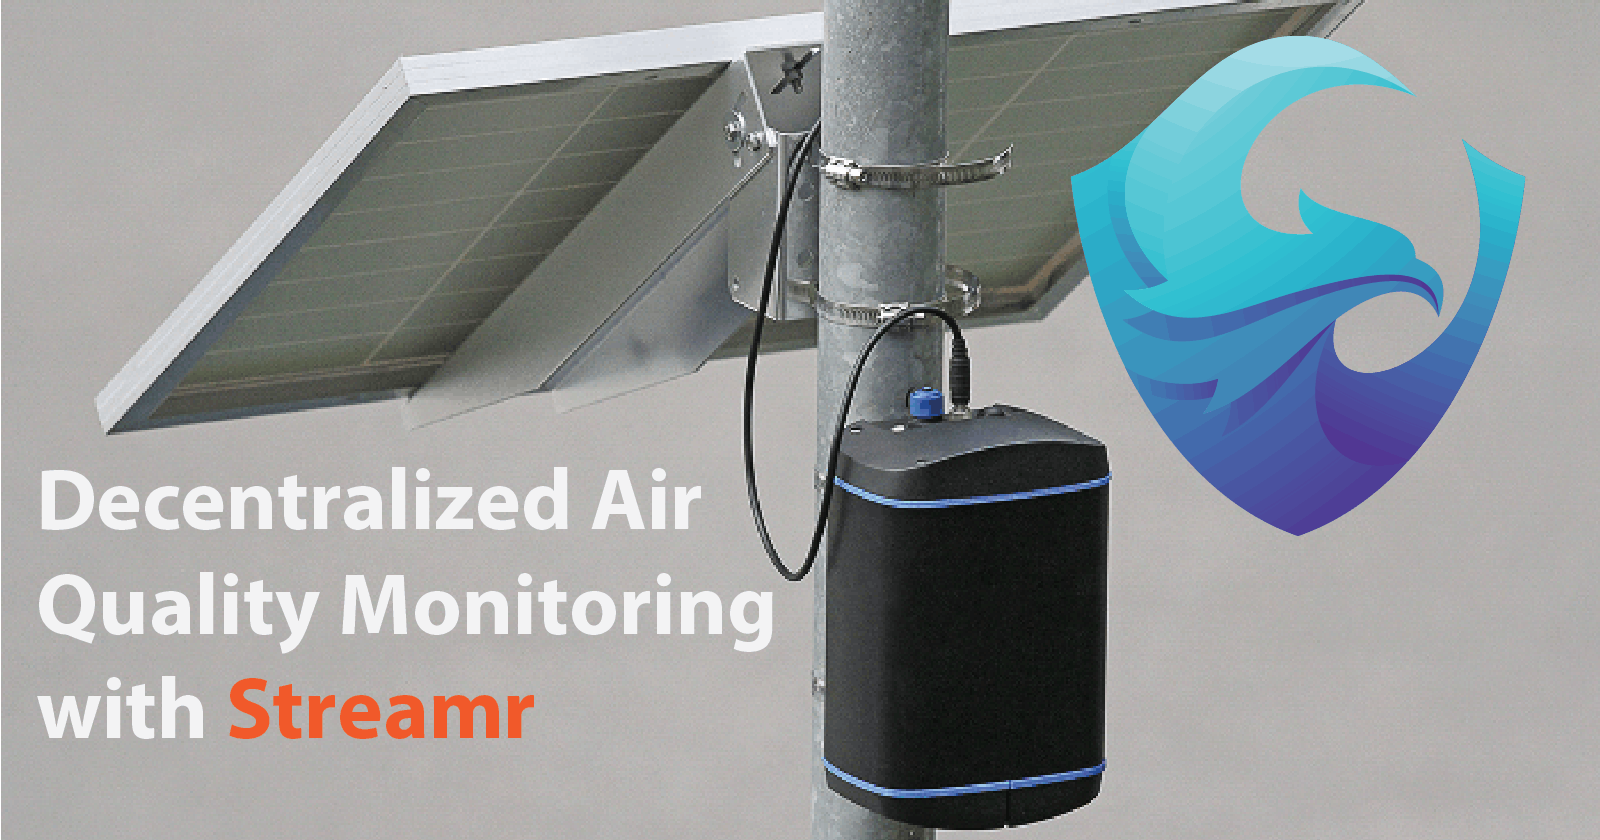 The AirGuardian Node:  How to Build a Fully Decentralized Air Quality Monitoring Node